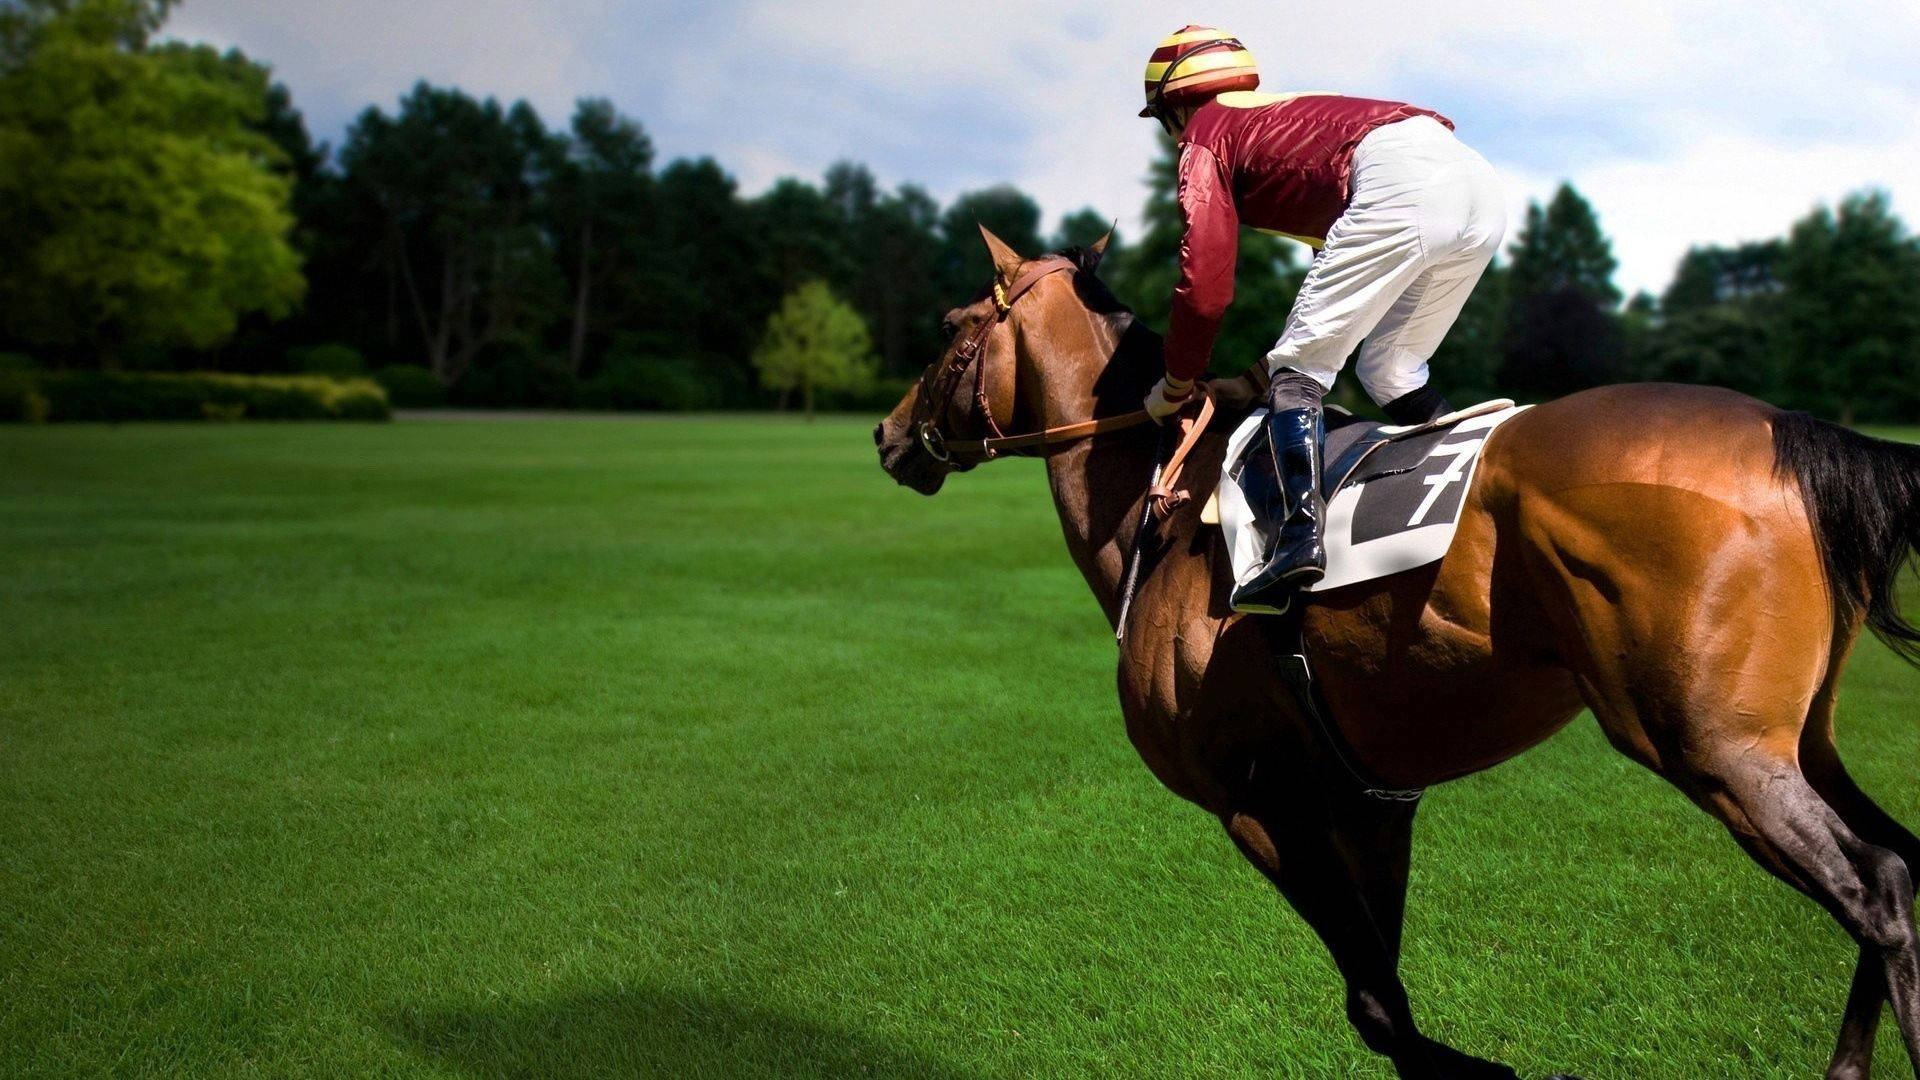 Equestrian Sports Photography Wallpaper